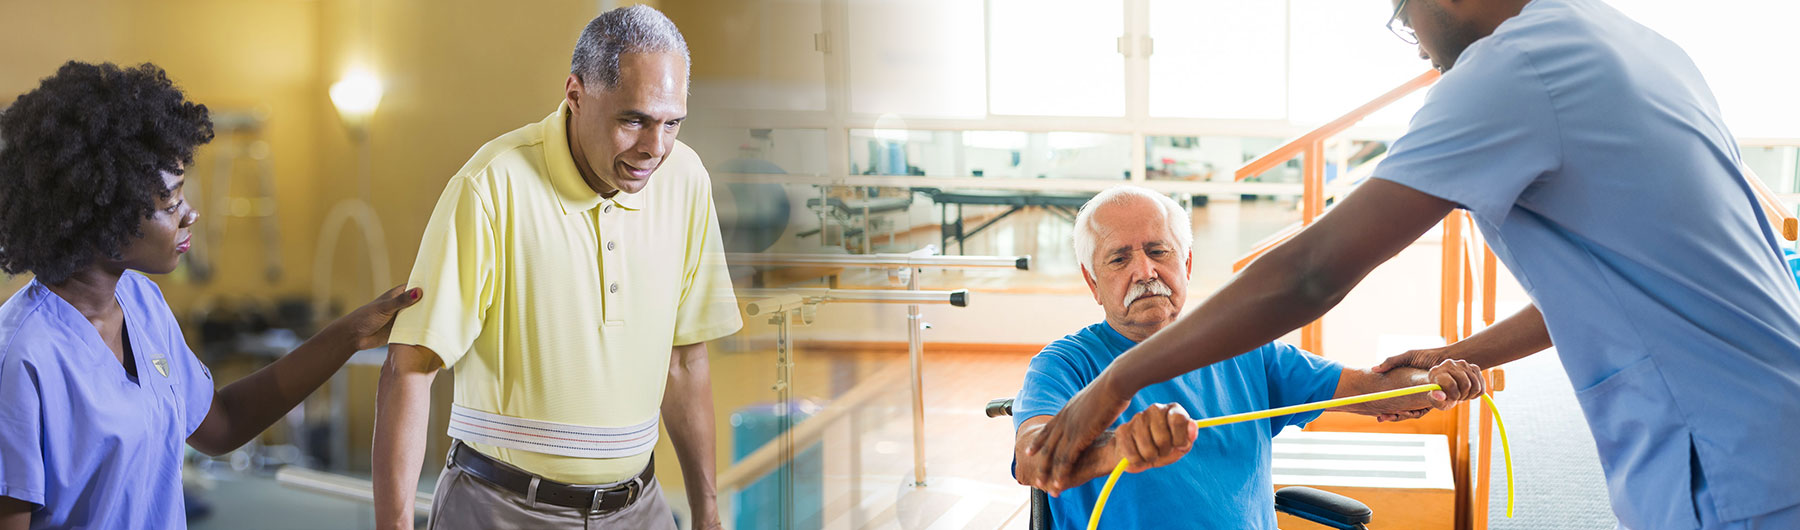 Physical Therapy assistants helping older male patients